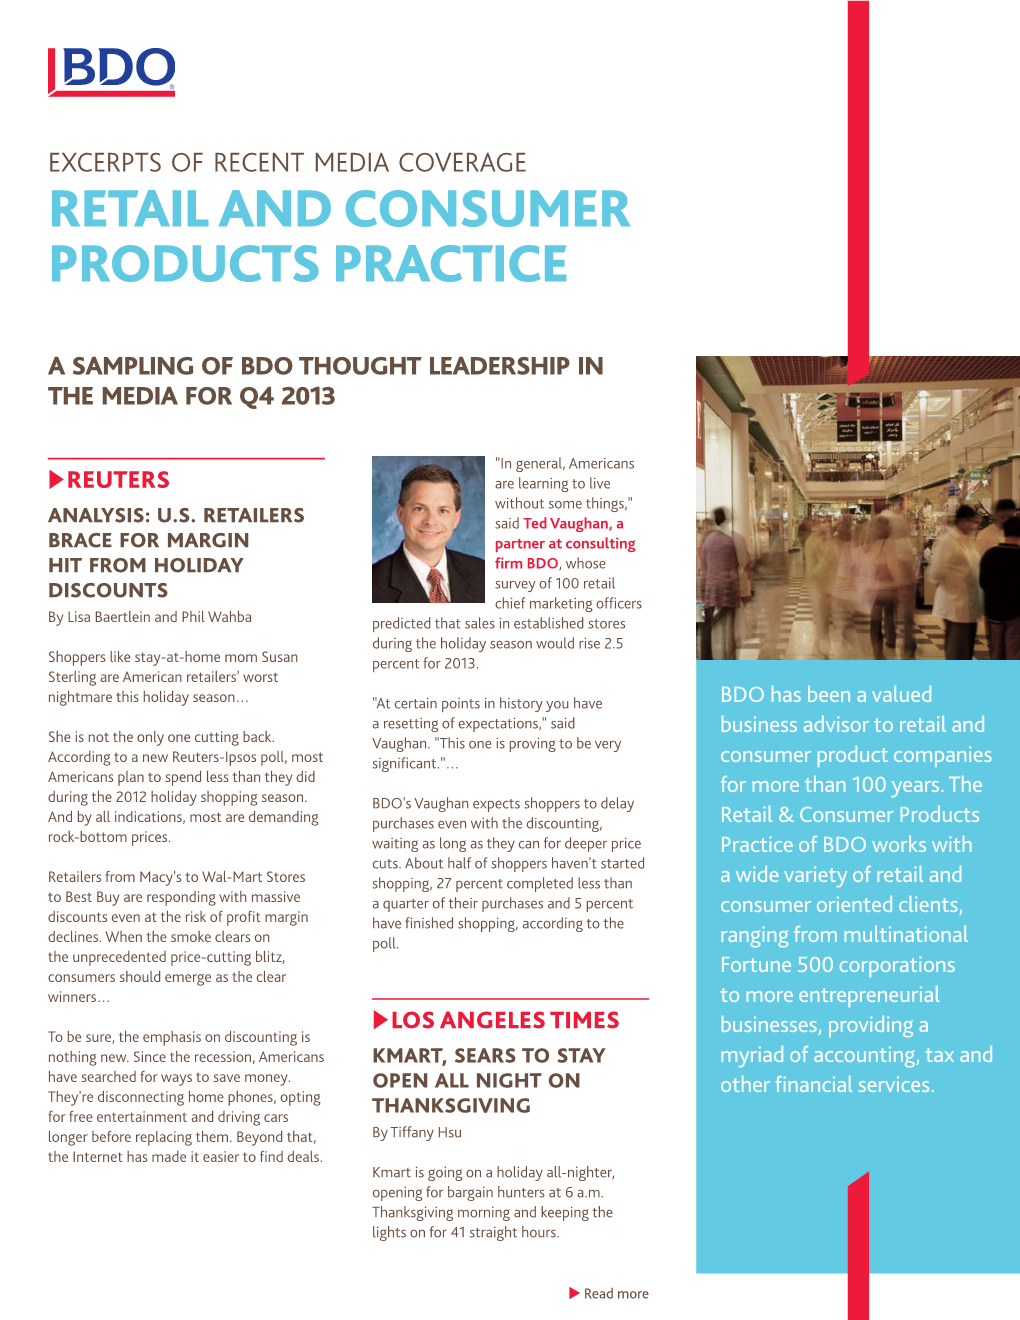 Retail and Consumer Products Practice